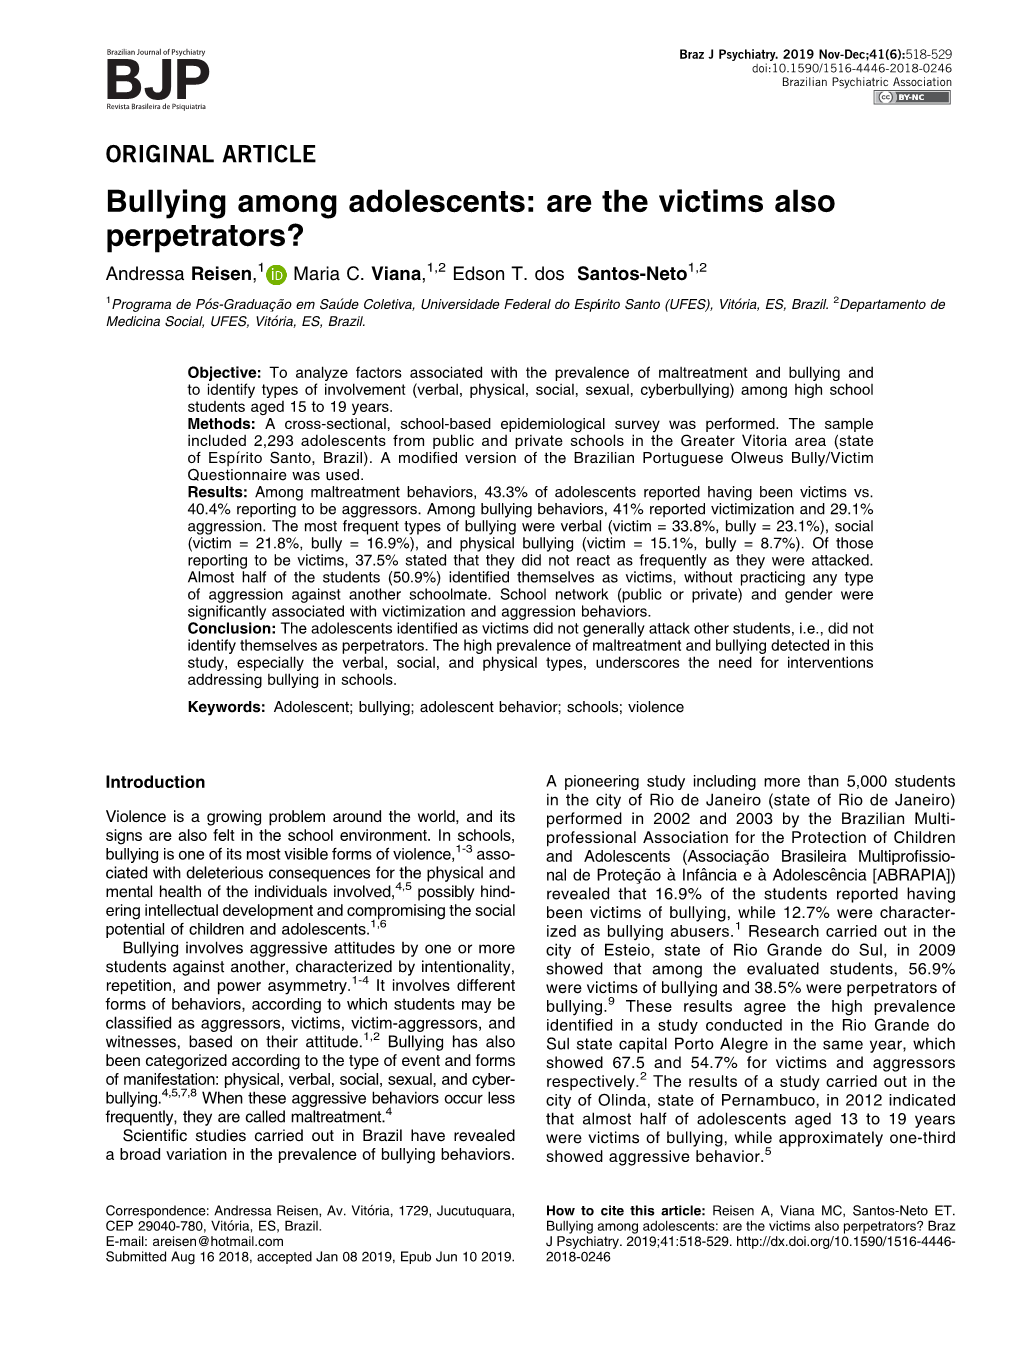 Bullying Among Adolescents: Are the Victims Also Perpetrators? Andressa Reisen,10000-0000-0000-0000 Maria C